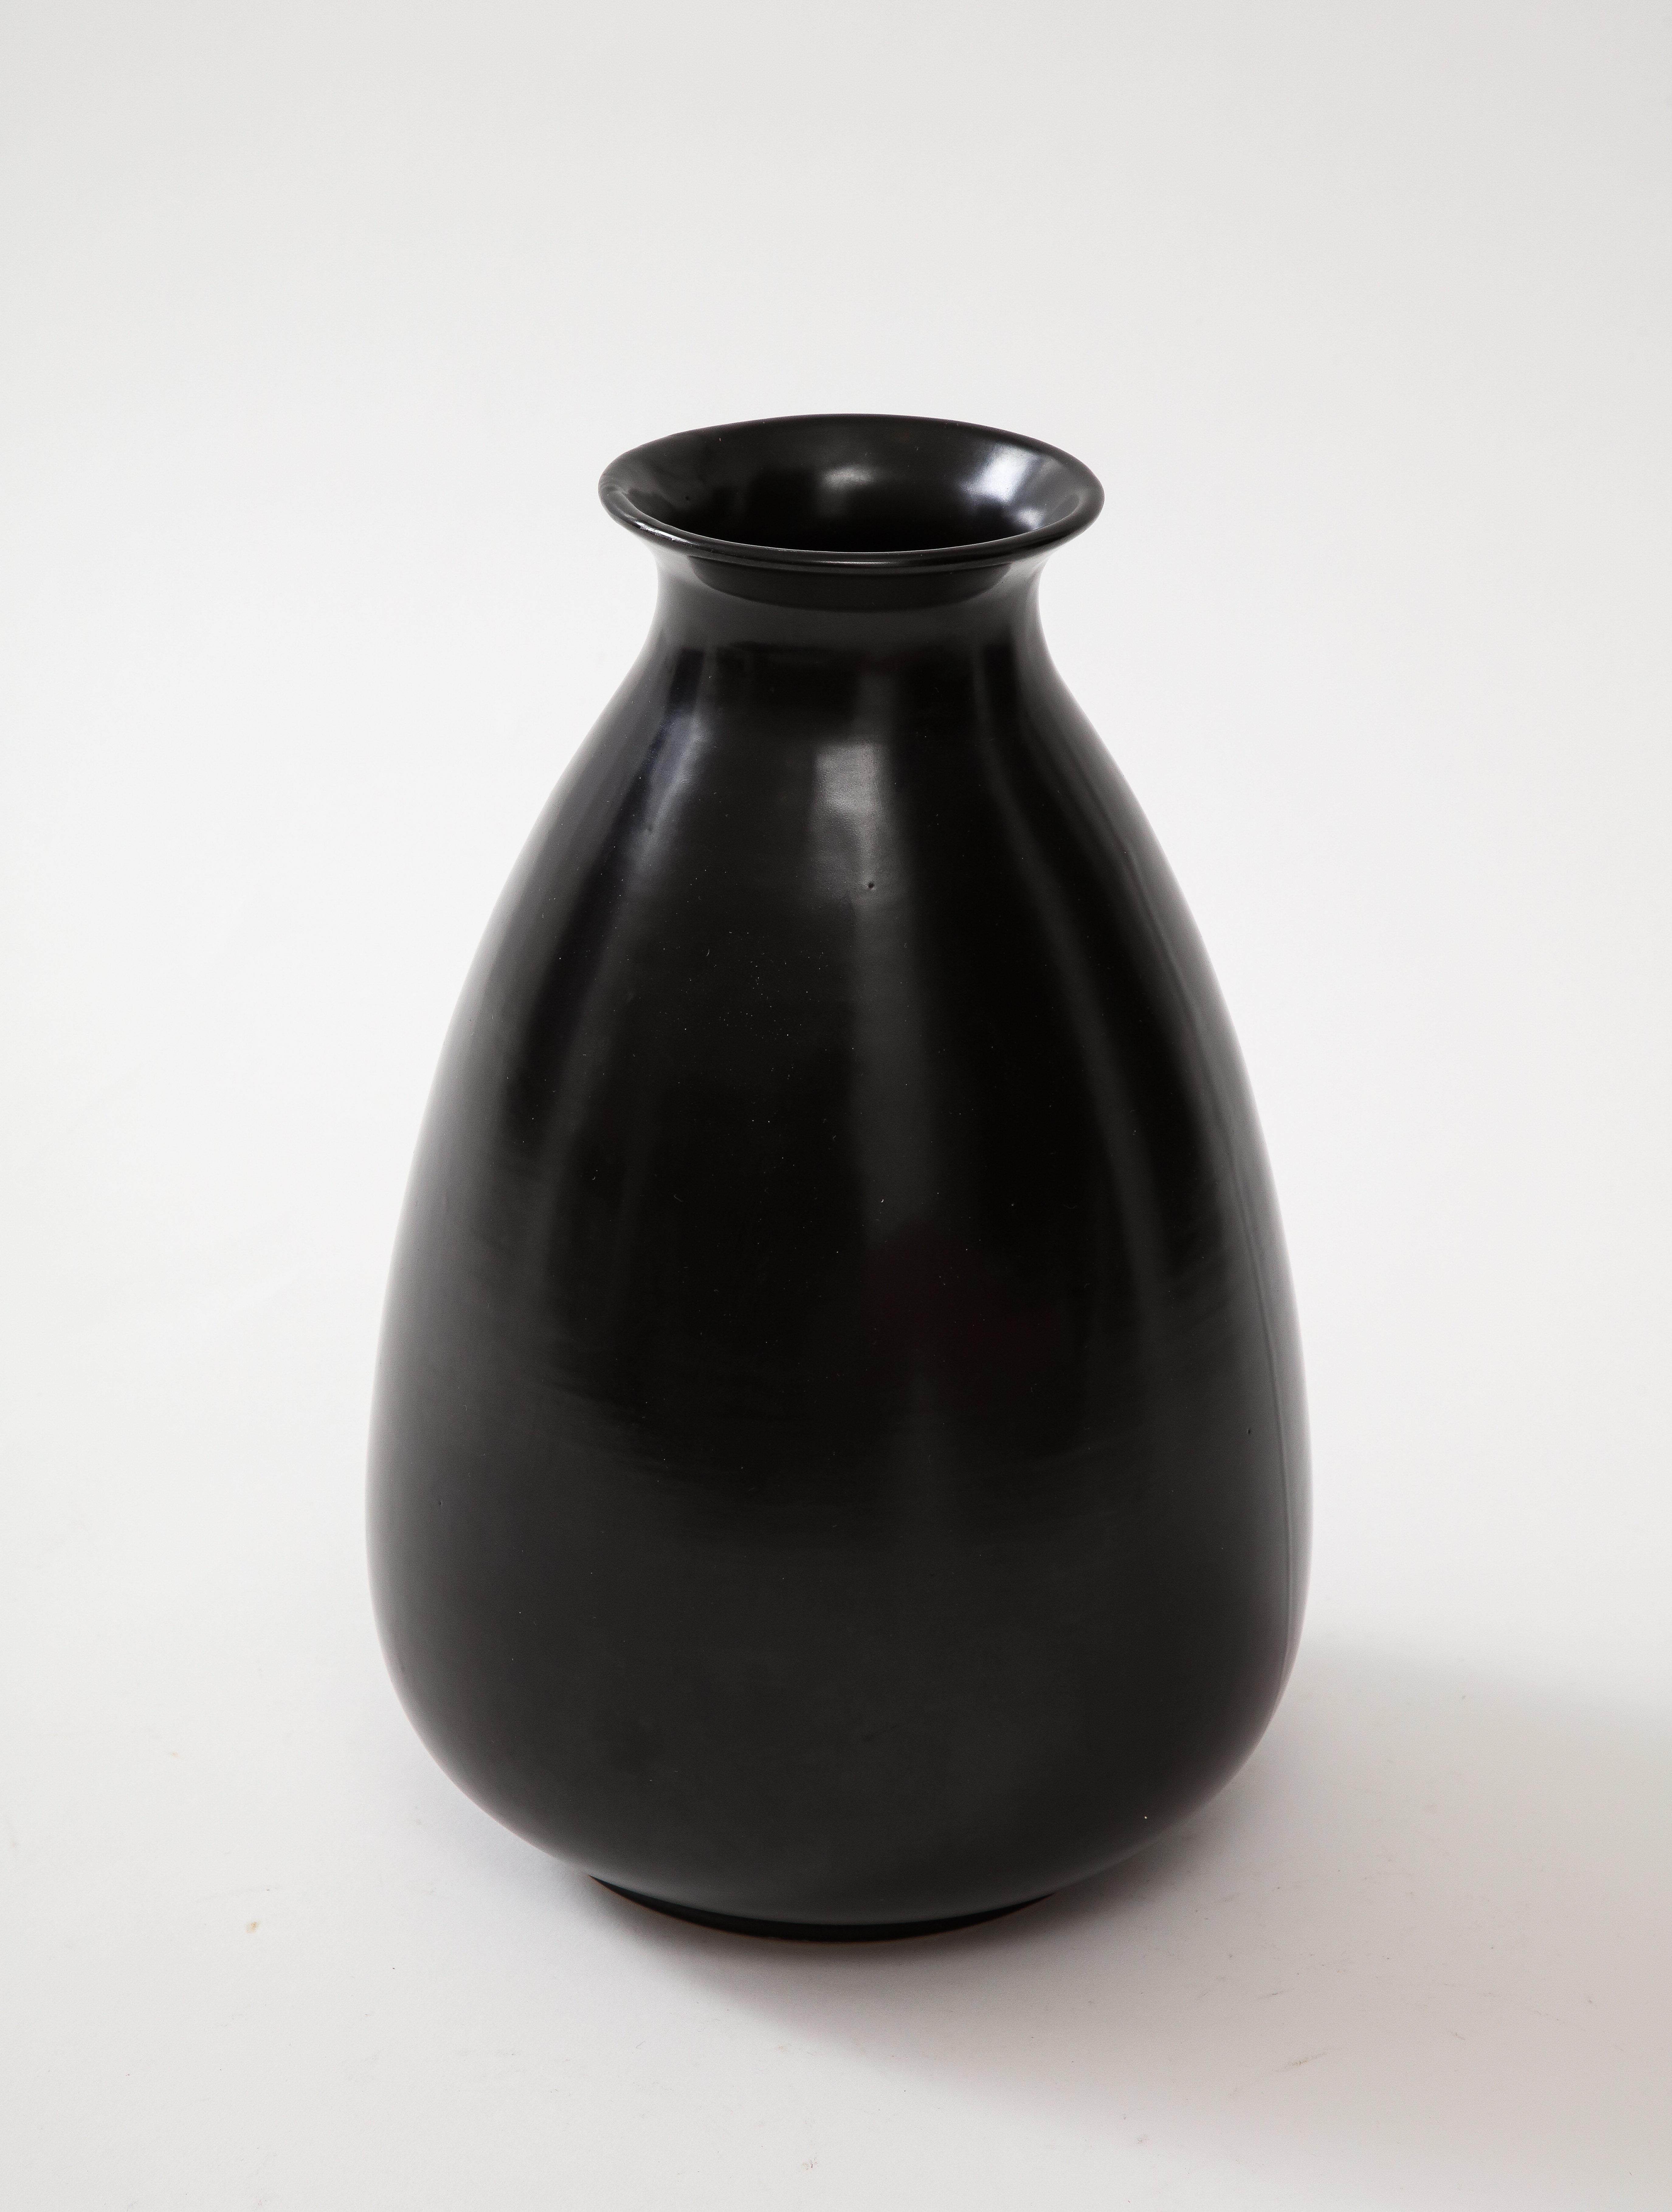 Black Glaze Ceramic Vase, Lipped High Neck, Squashed Tear Form, France, c 1960 In Good Condition For Sale In Brooklyn, NY